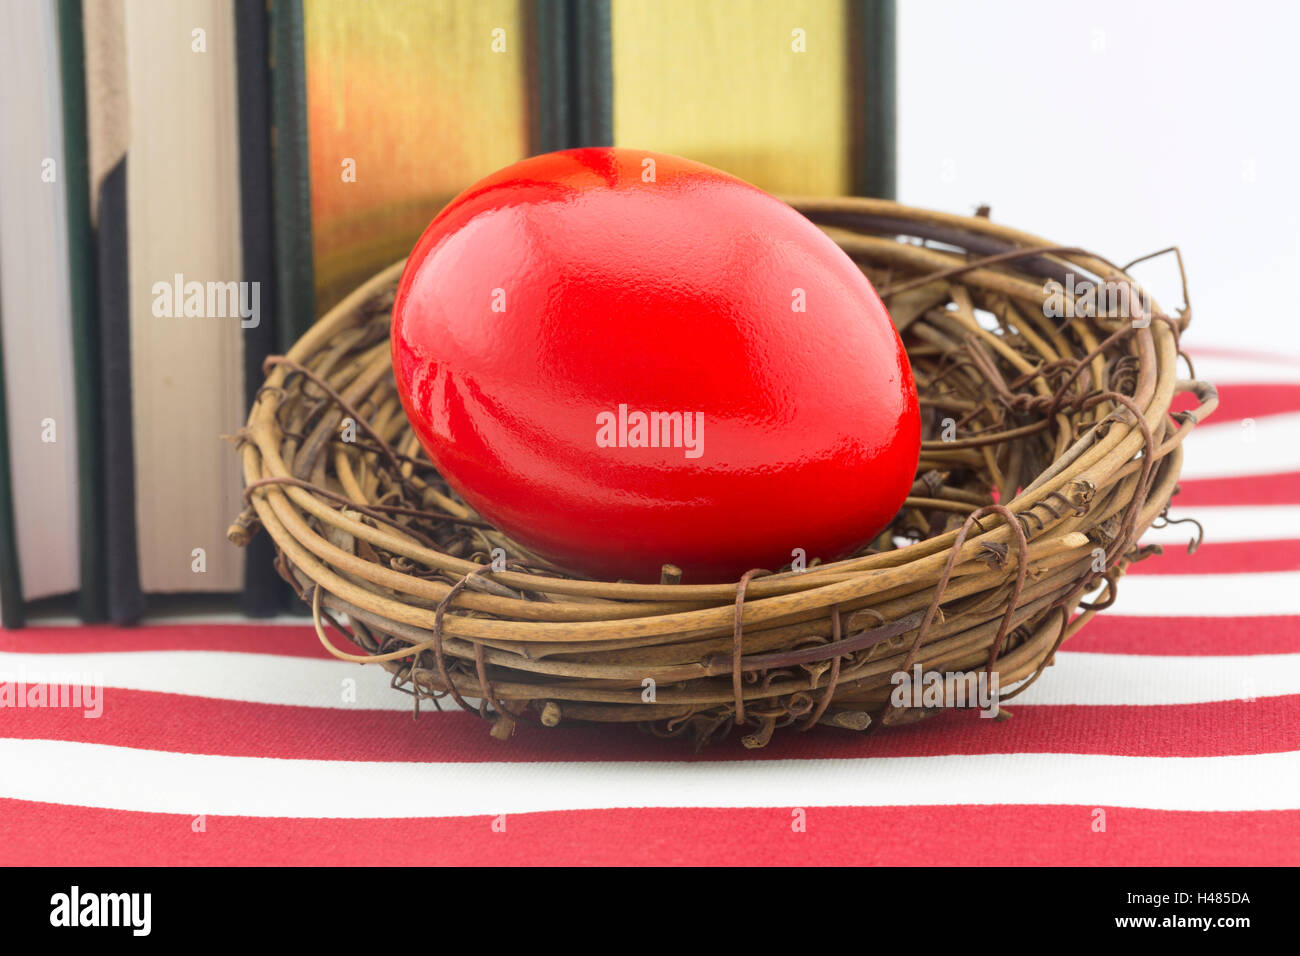 Red nest egg in front of books on American flag pattern.  Still life reflects problematic high costs of education and its debt. Stock Photo